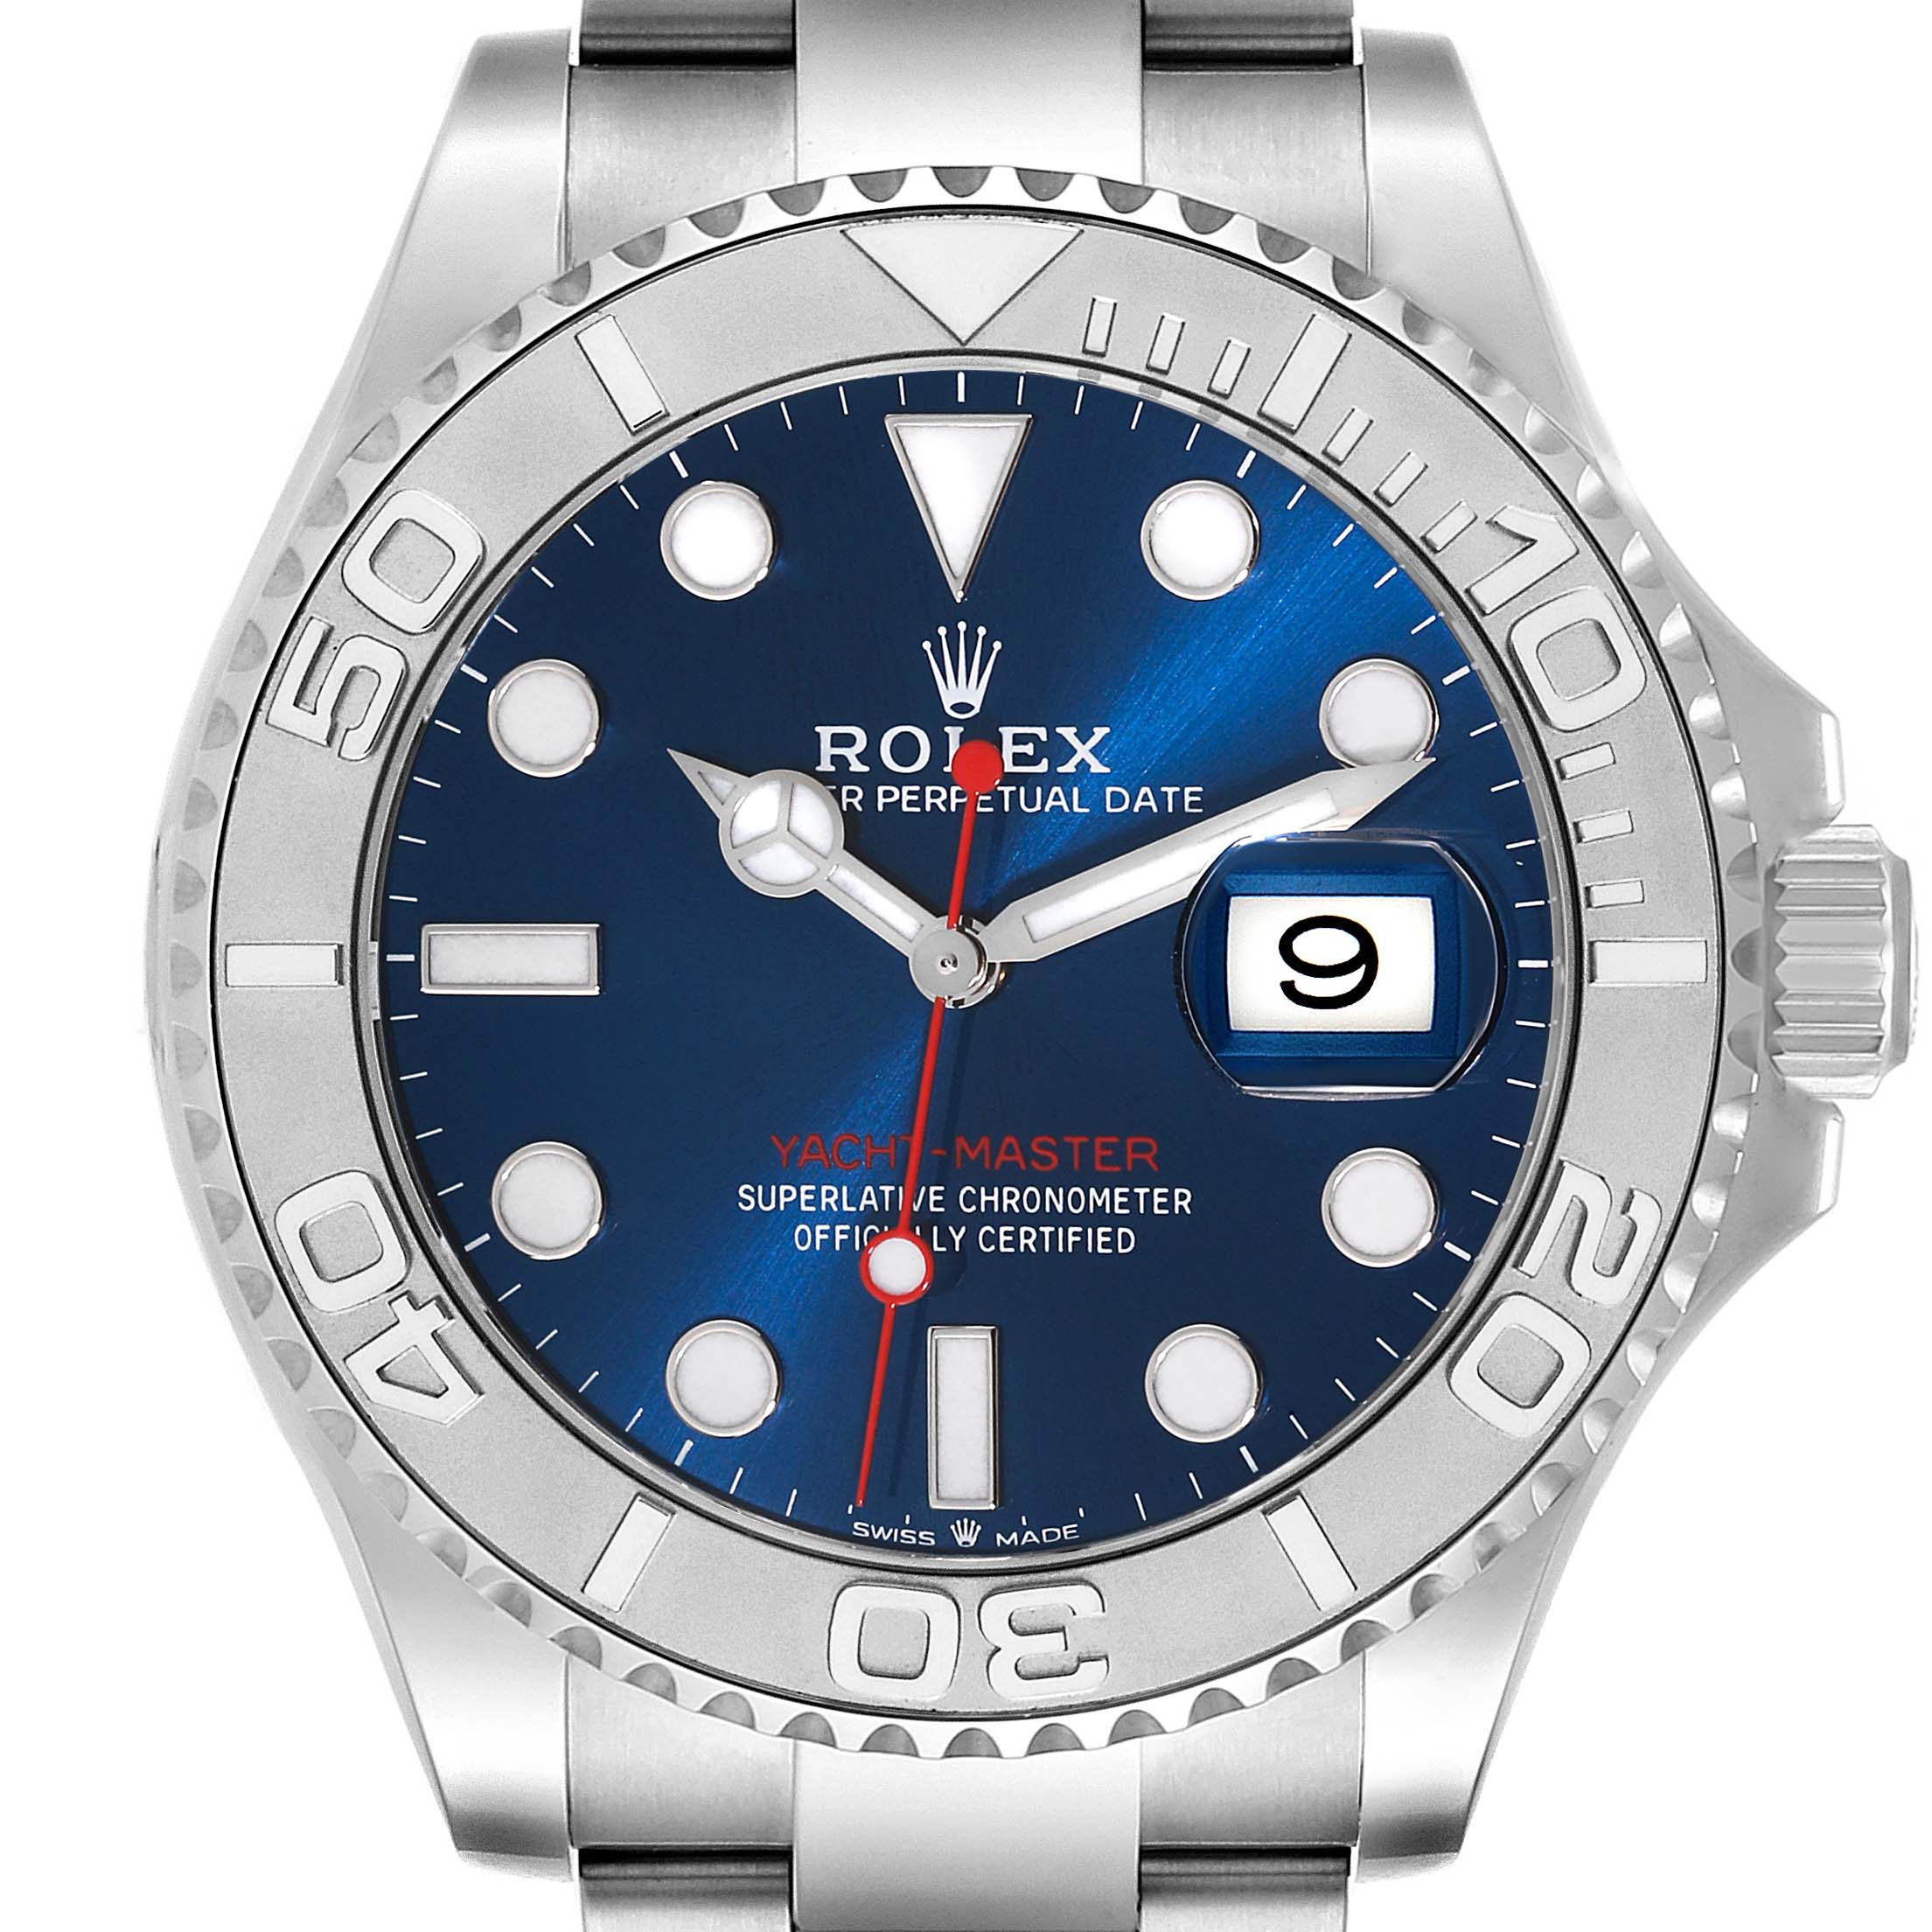 The Yacht-Master in stainless steel with the blue dial